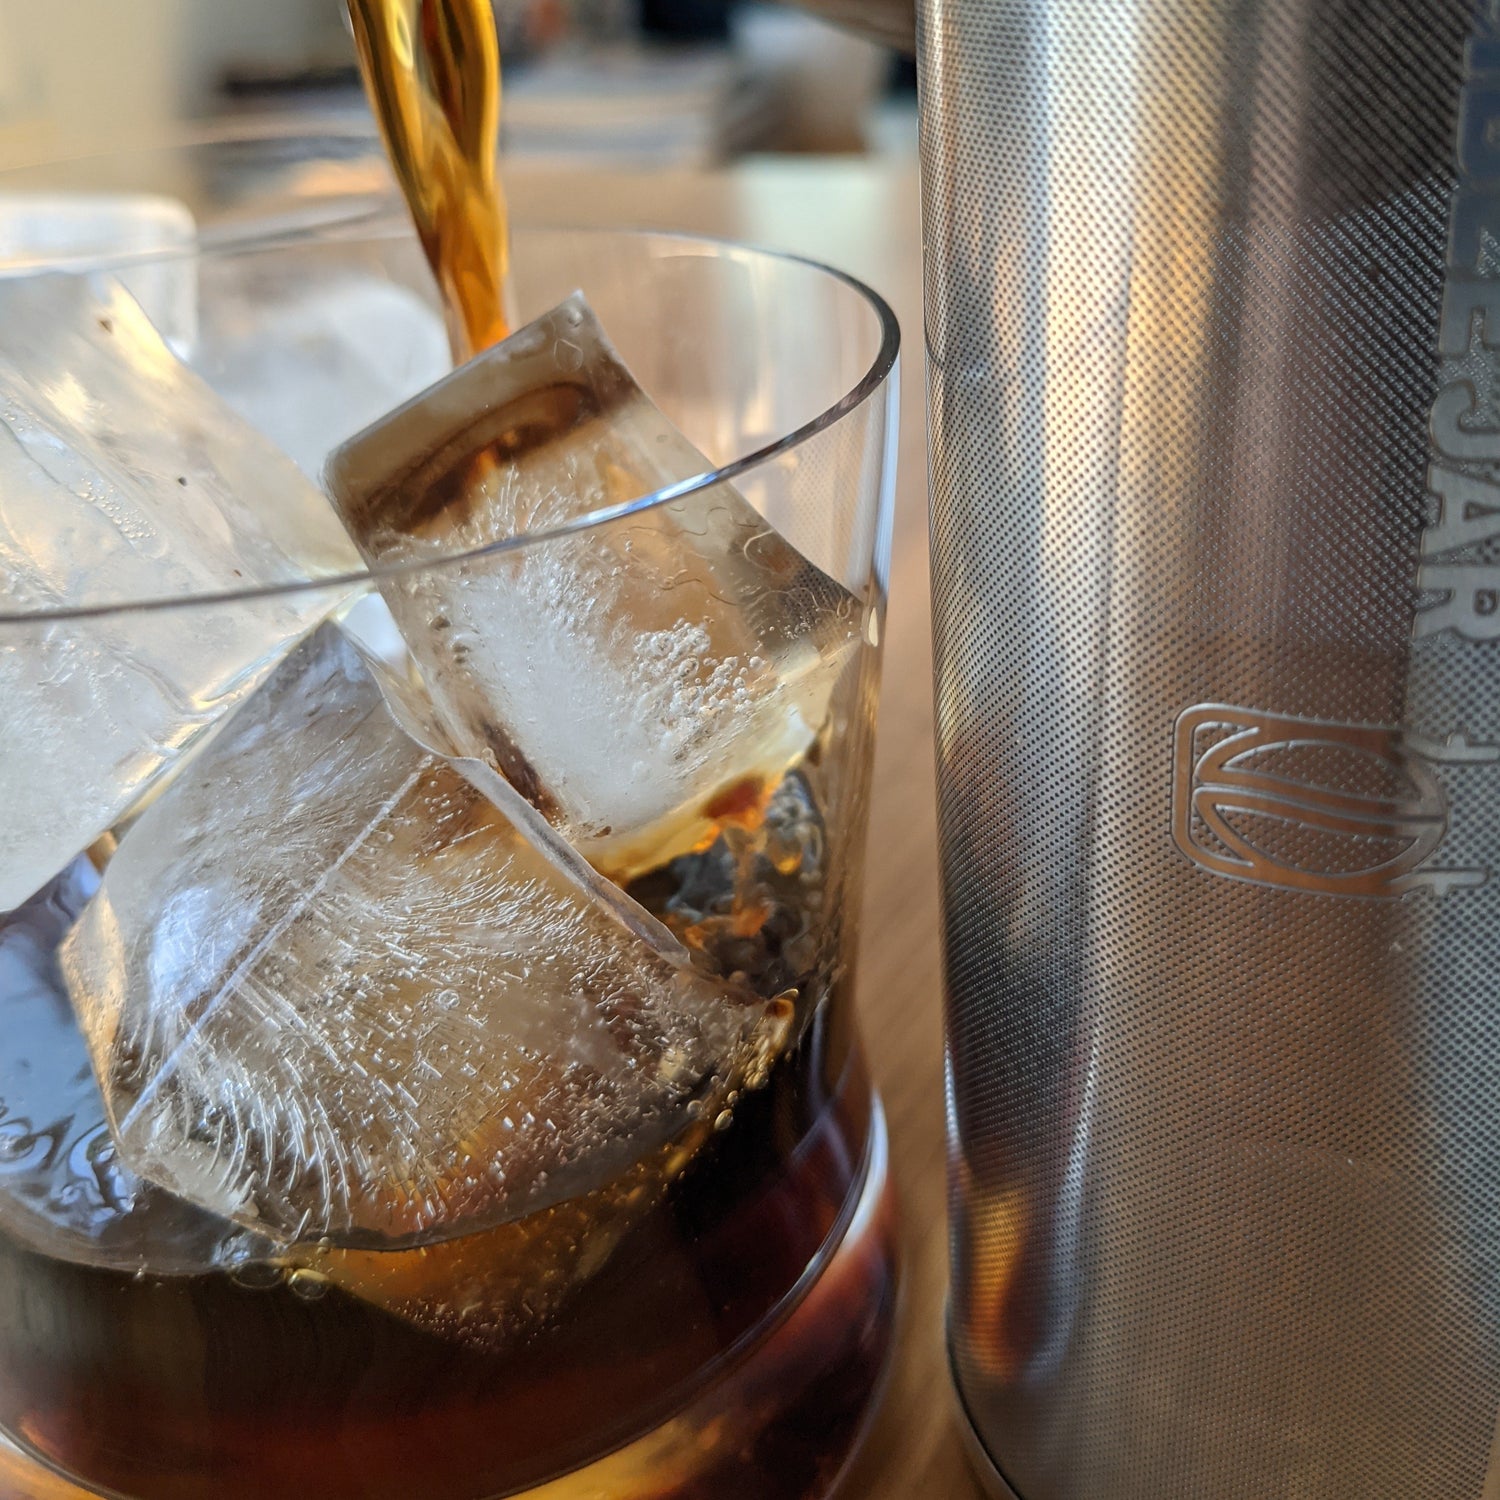 The Rumble Jar - Rumble Go: Portable Cold Brew Coffee Maker (filter on –  Fluffaholic